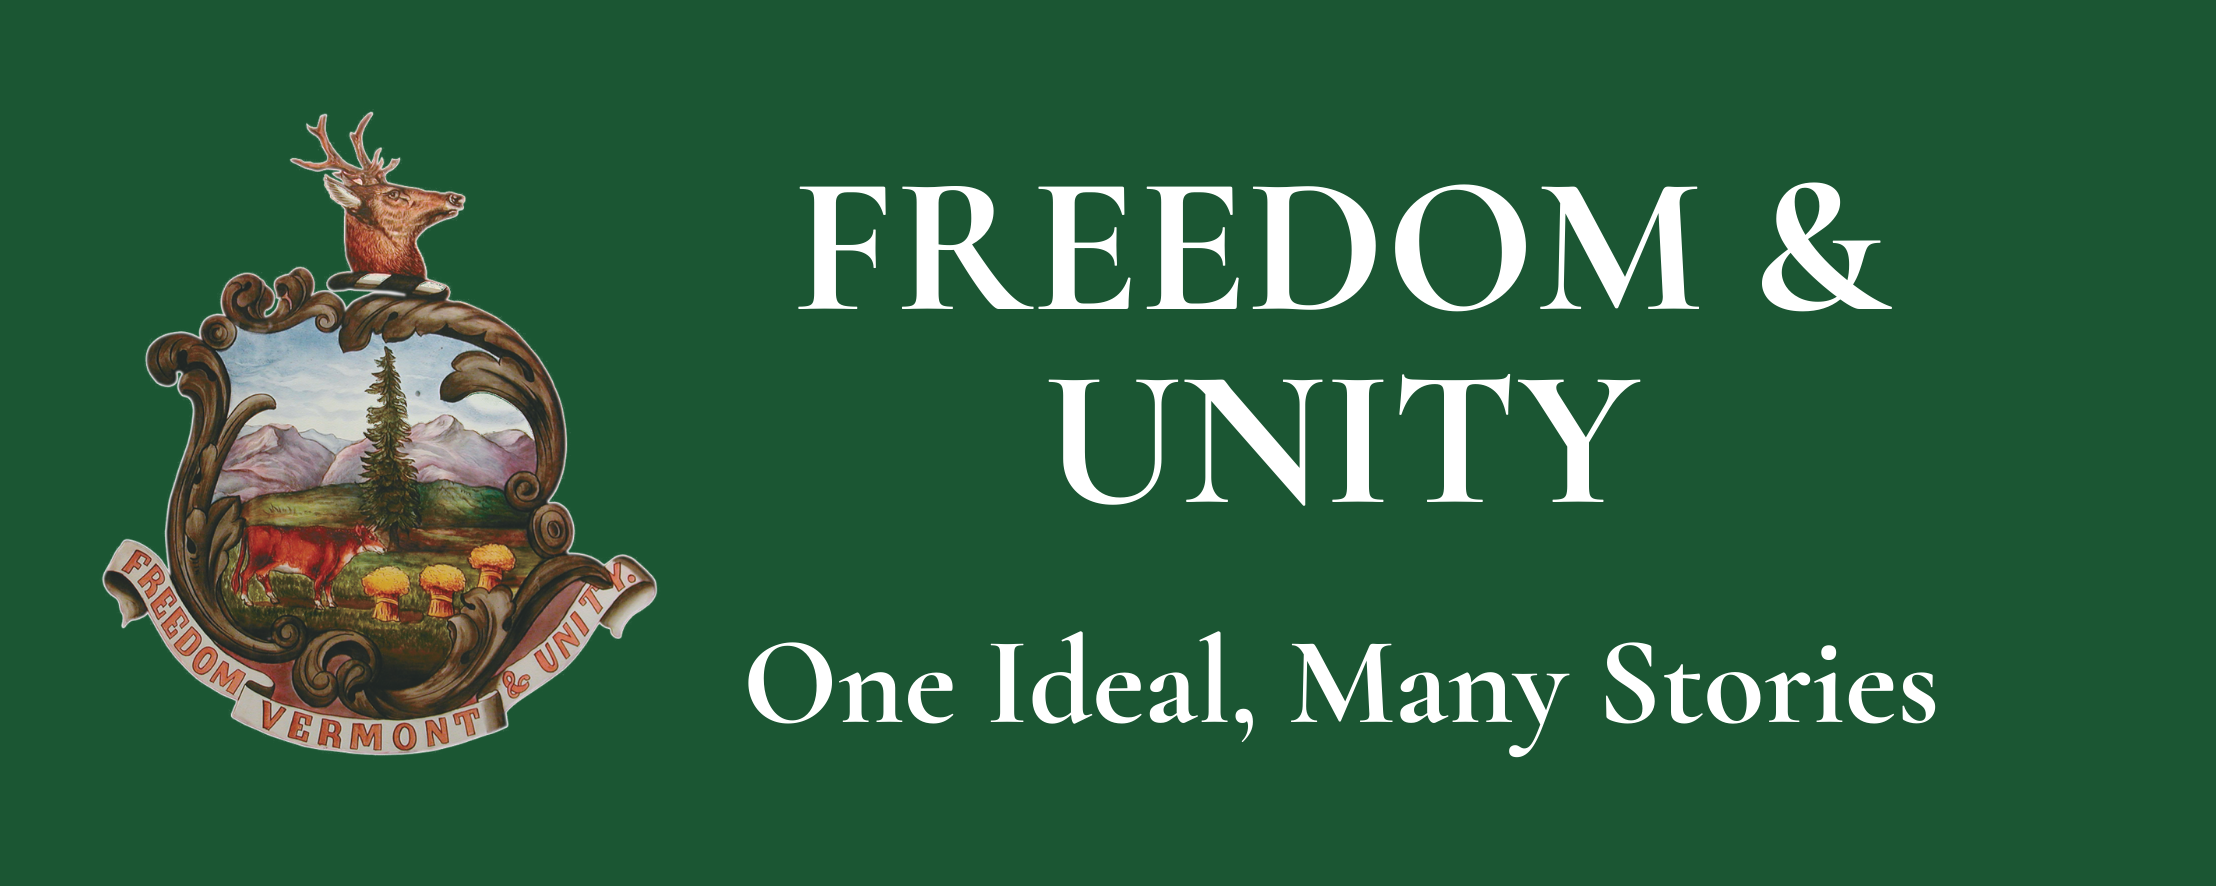 Freedom & Unity: One Ideal, Many Stories